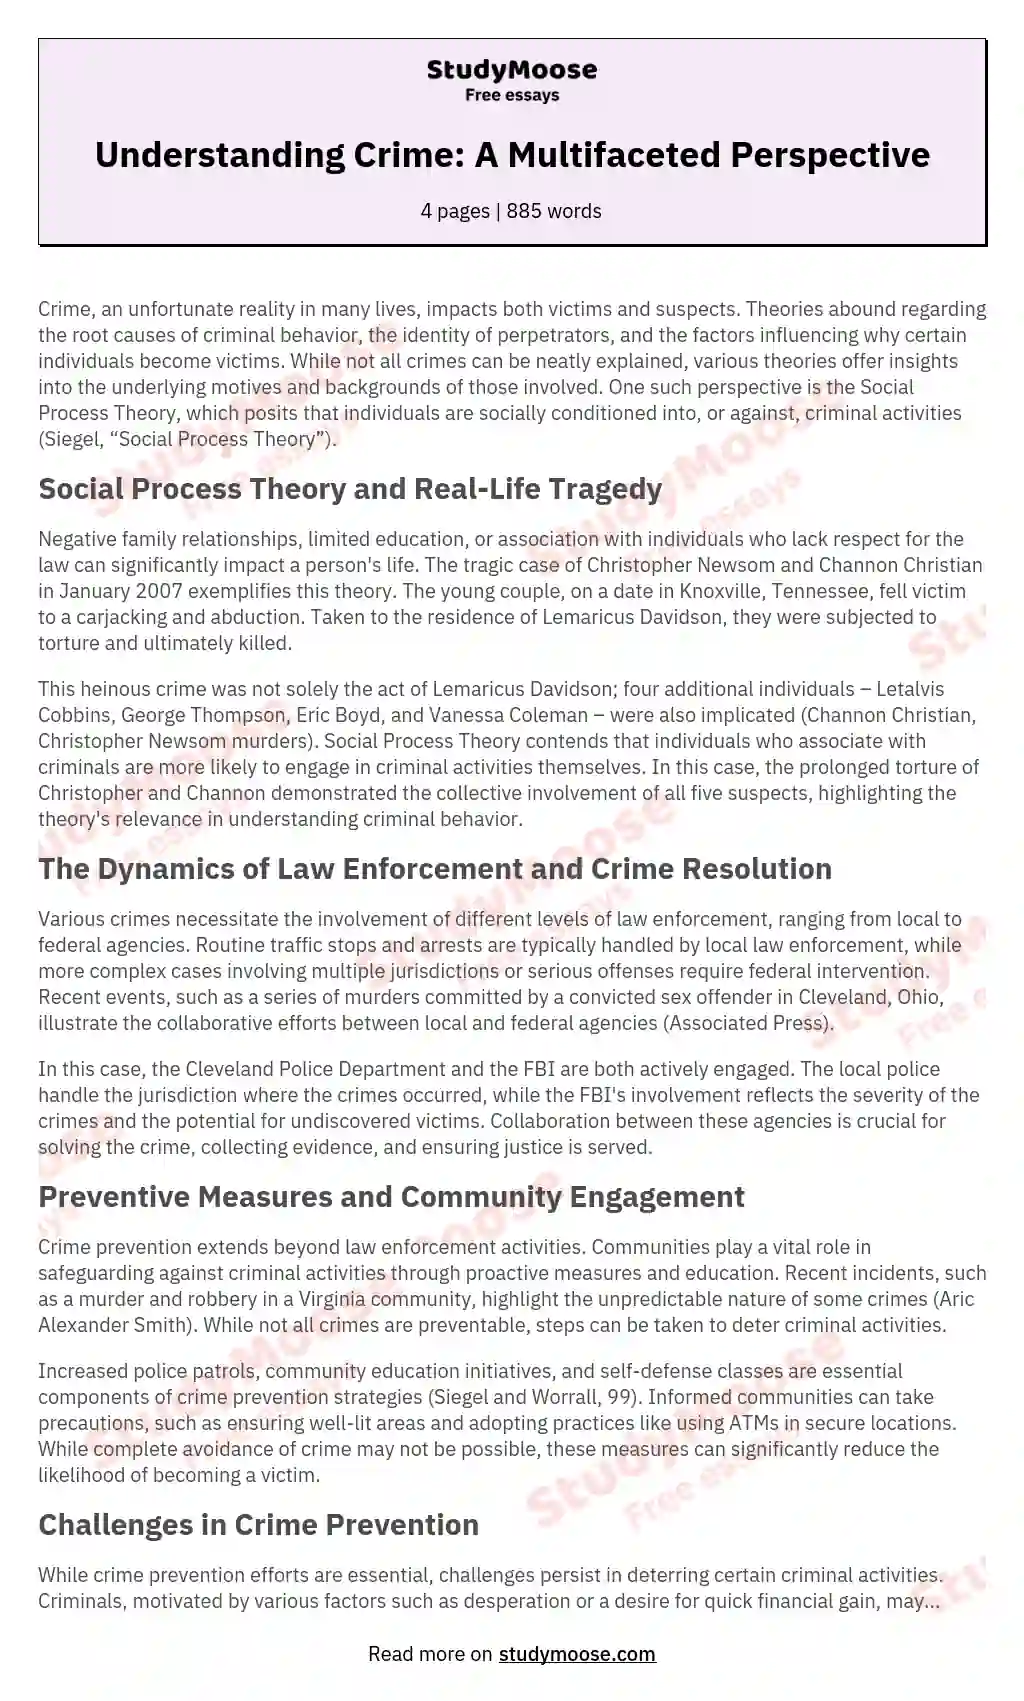 Understanding Crime: A Multifaceted Perspective essay